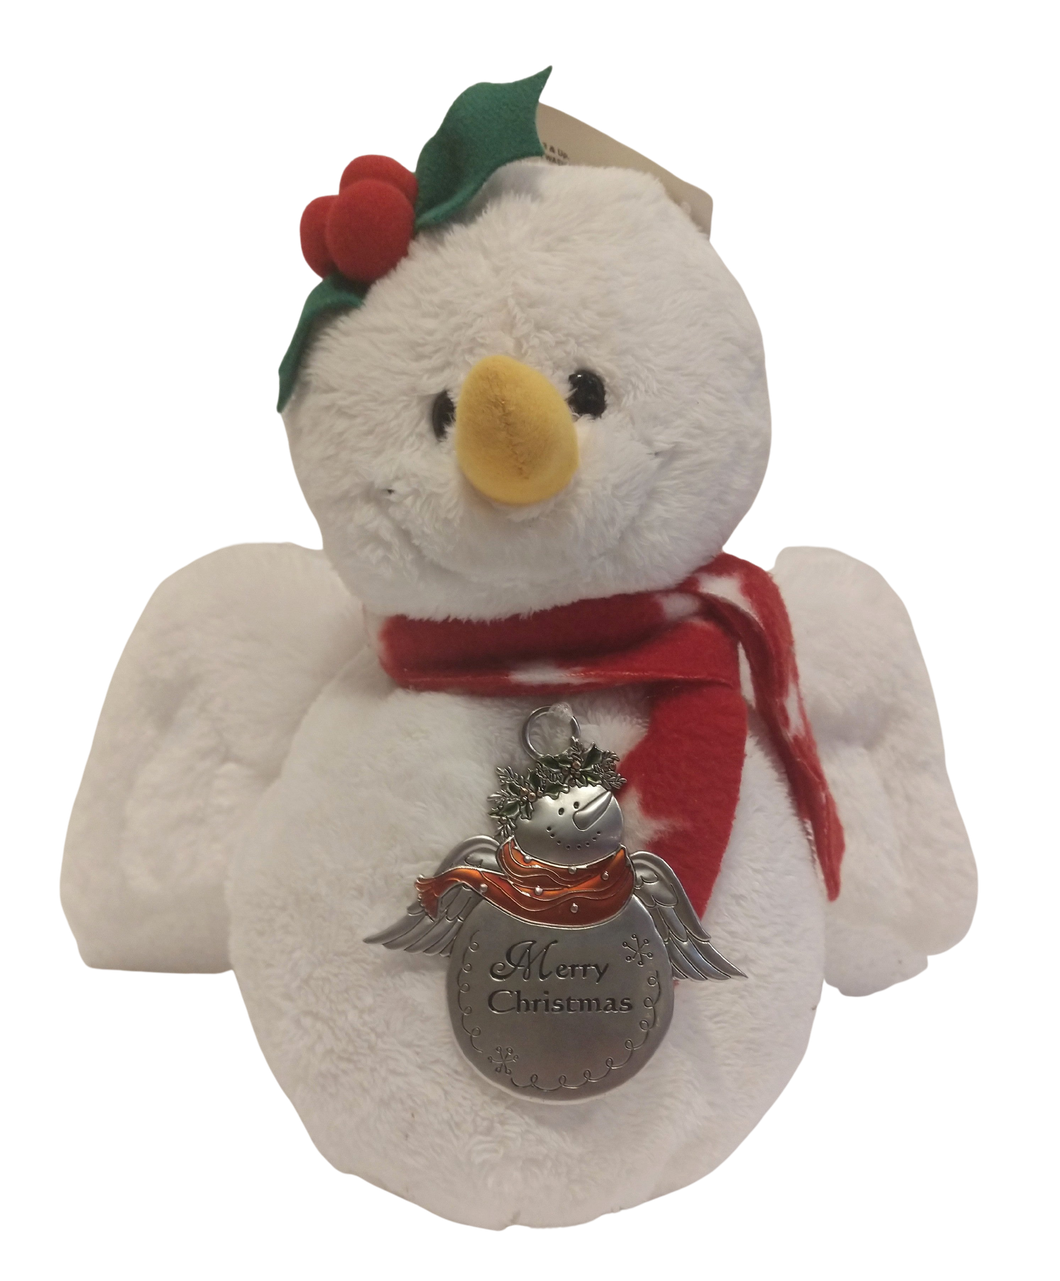 Plush white snowman with angel wings & a snowman ornament 10